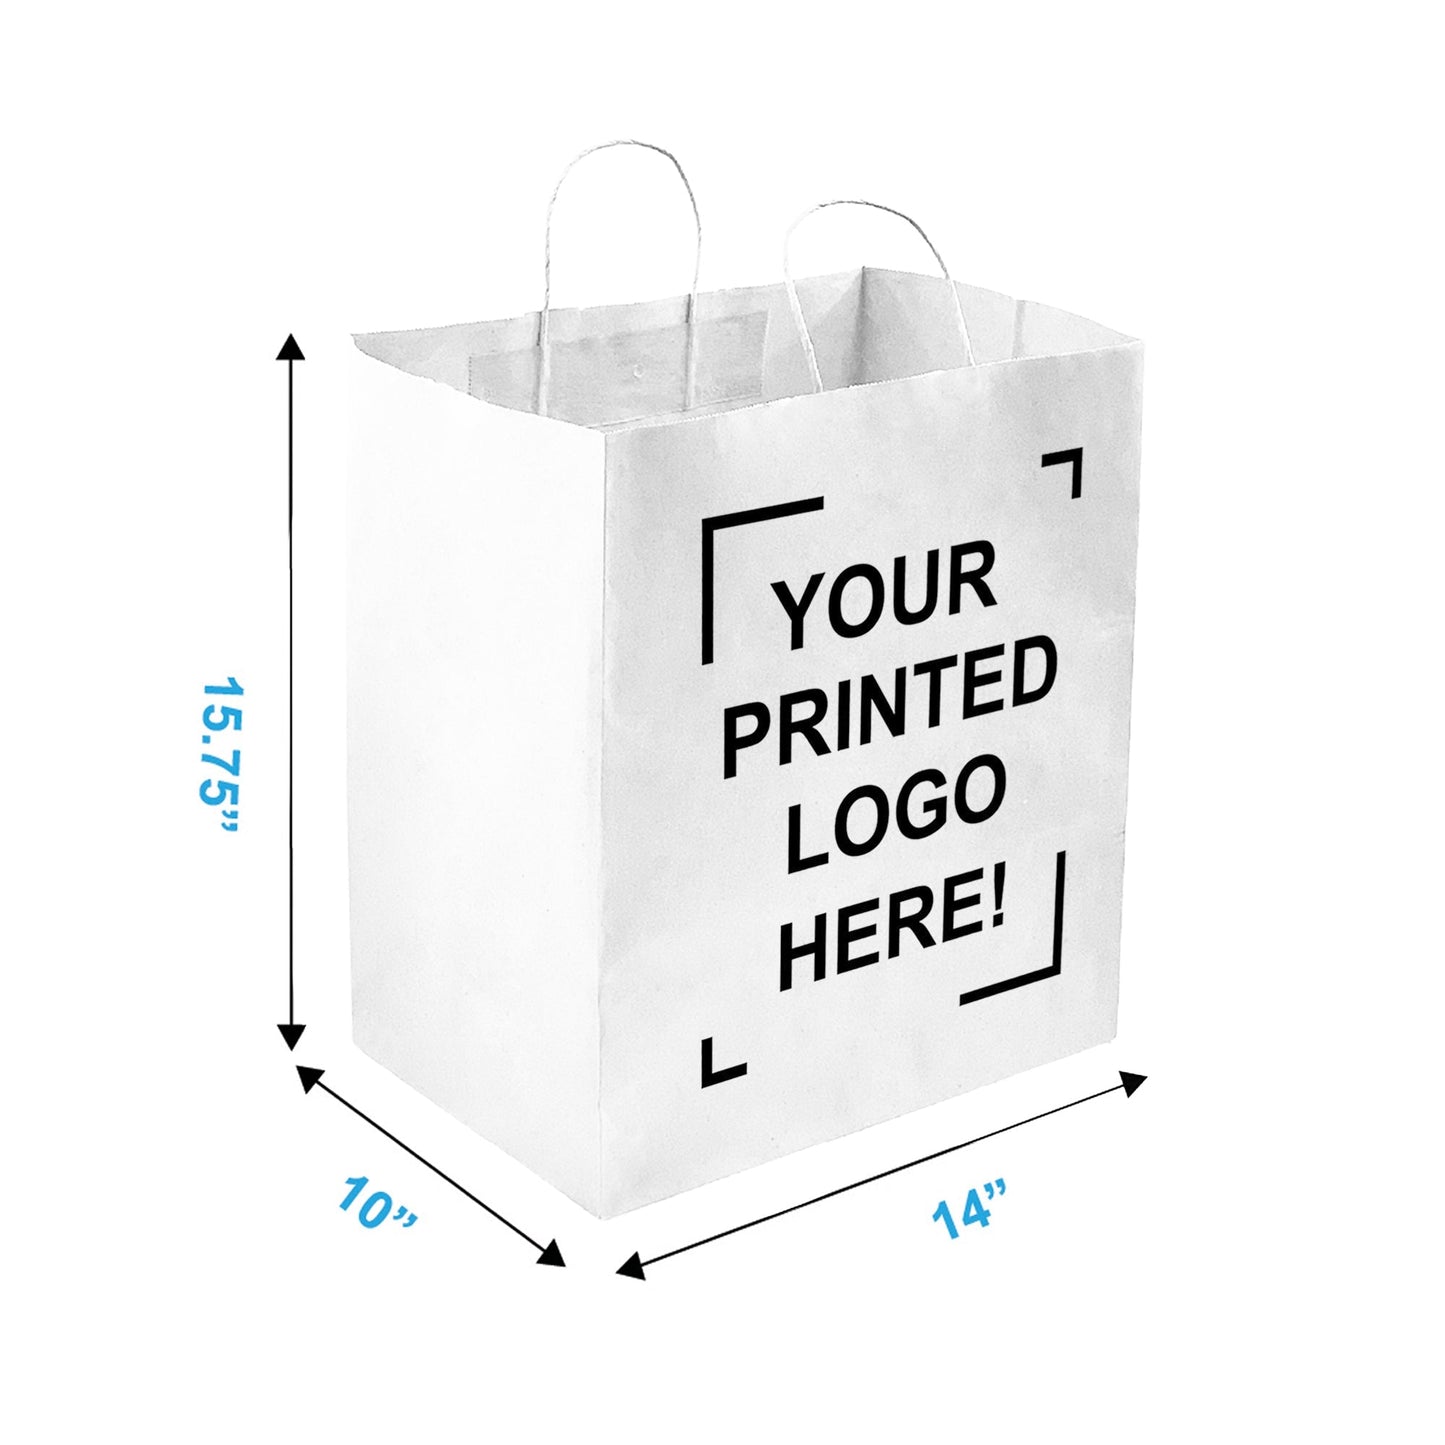 Custom Print Super Royal 14x10x15.75 inches White Paper Bags Twisted Handles, $2.50 / unit, 50pcs/bundle, One Side Full Color Printed in Canada